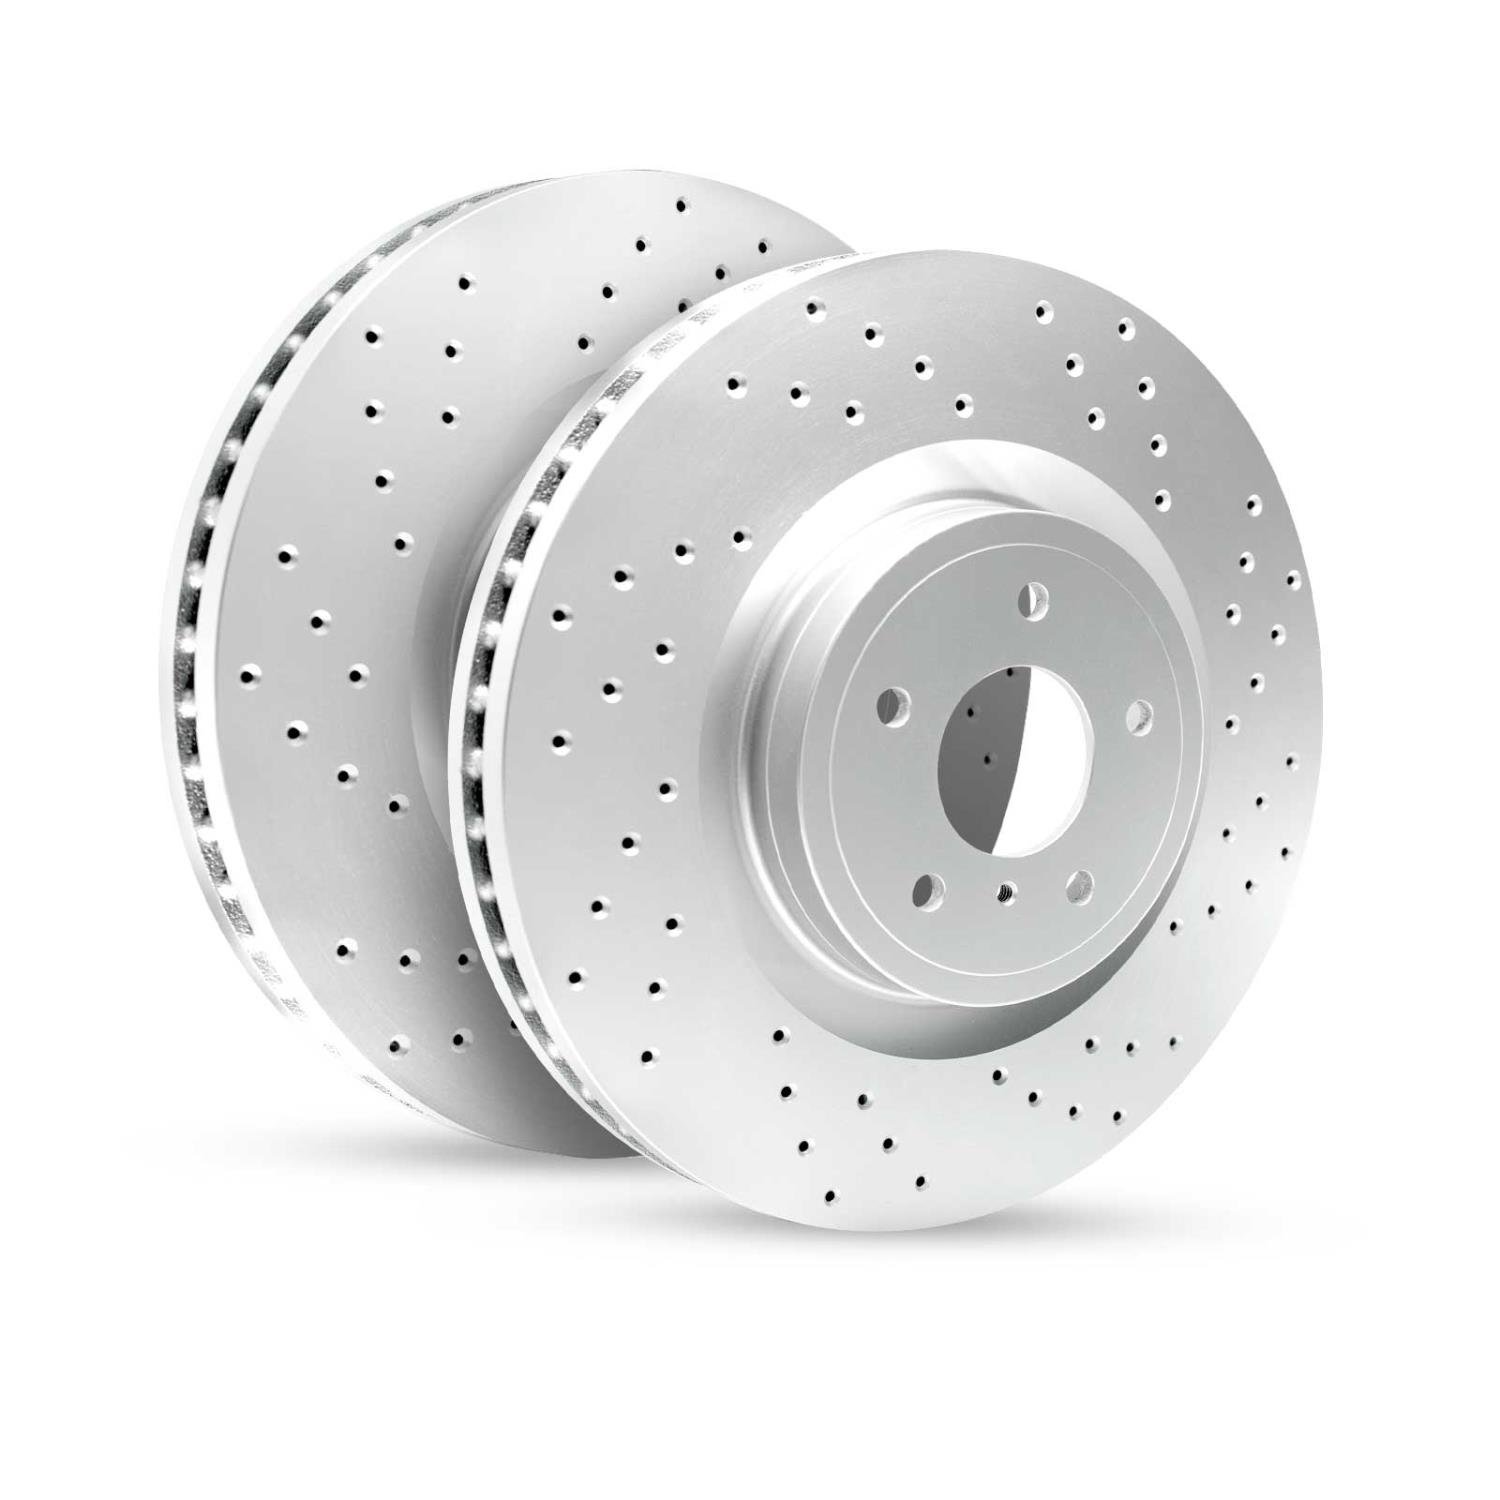 GEO-Carbon Drilled/Slotted Rotors, 1990-2005 Fits Multiple Makes/Models, Position: Front